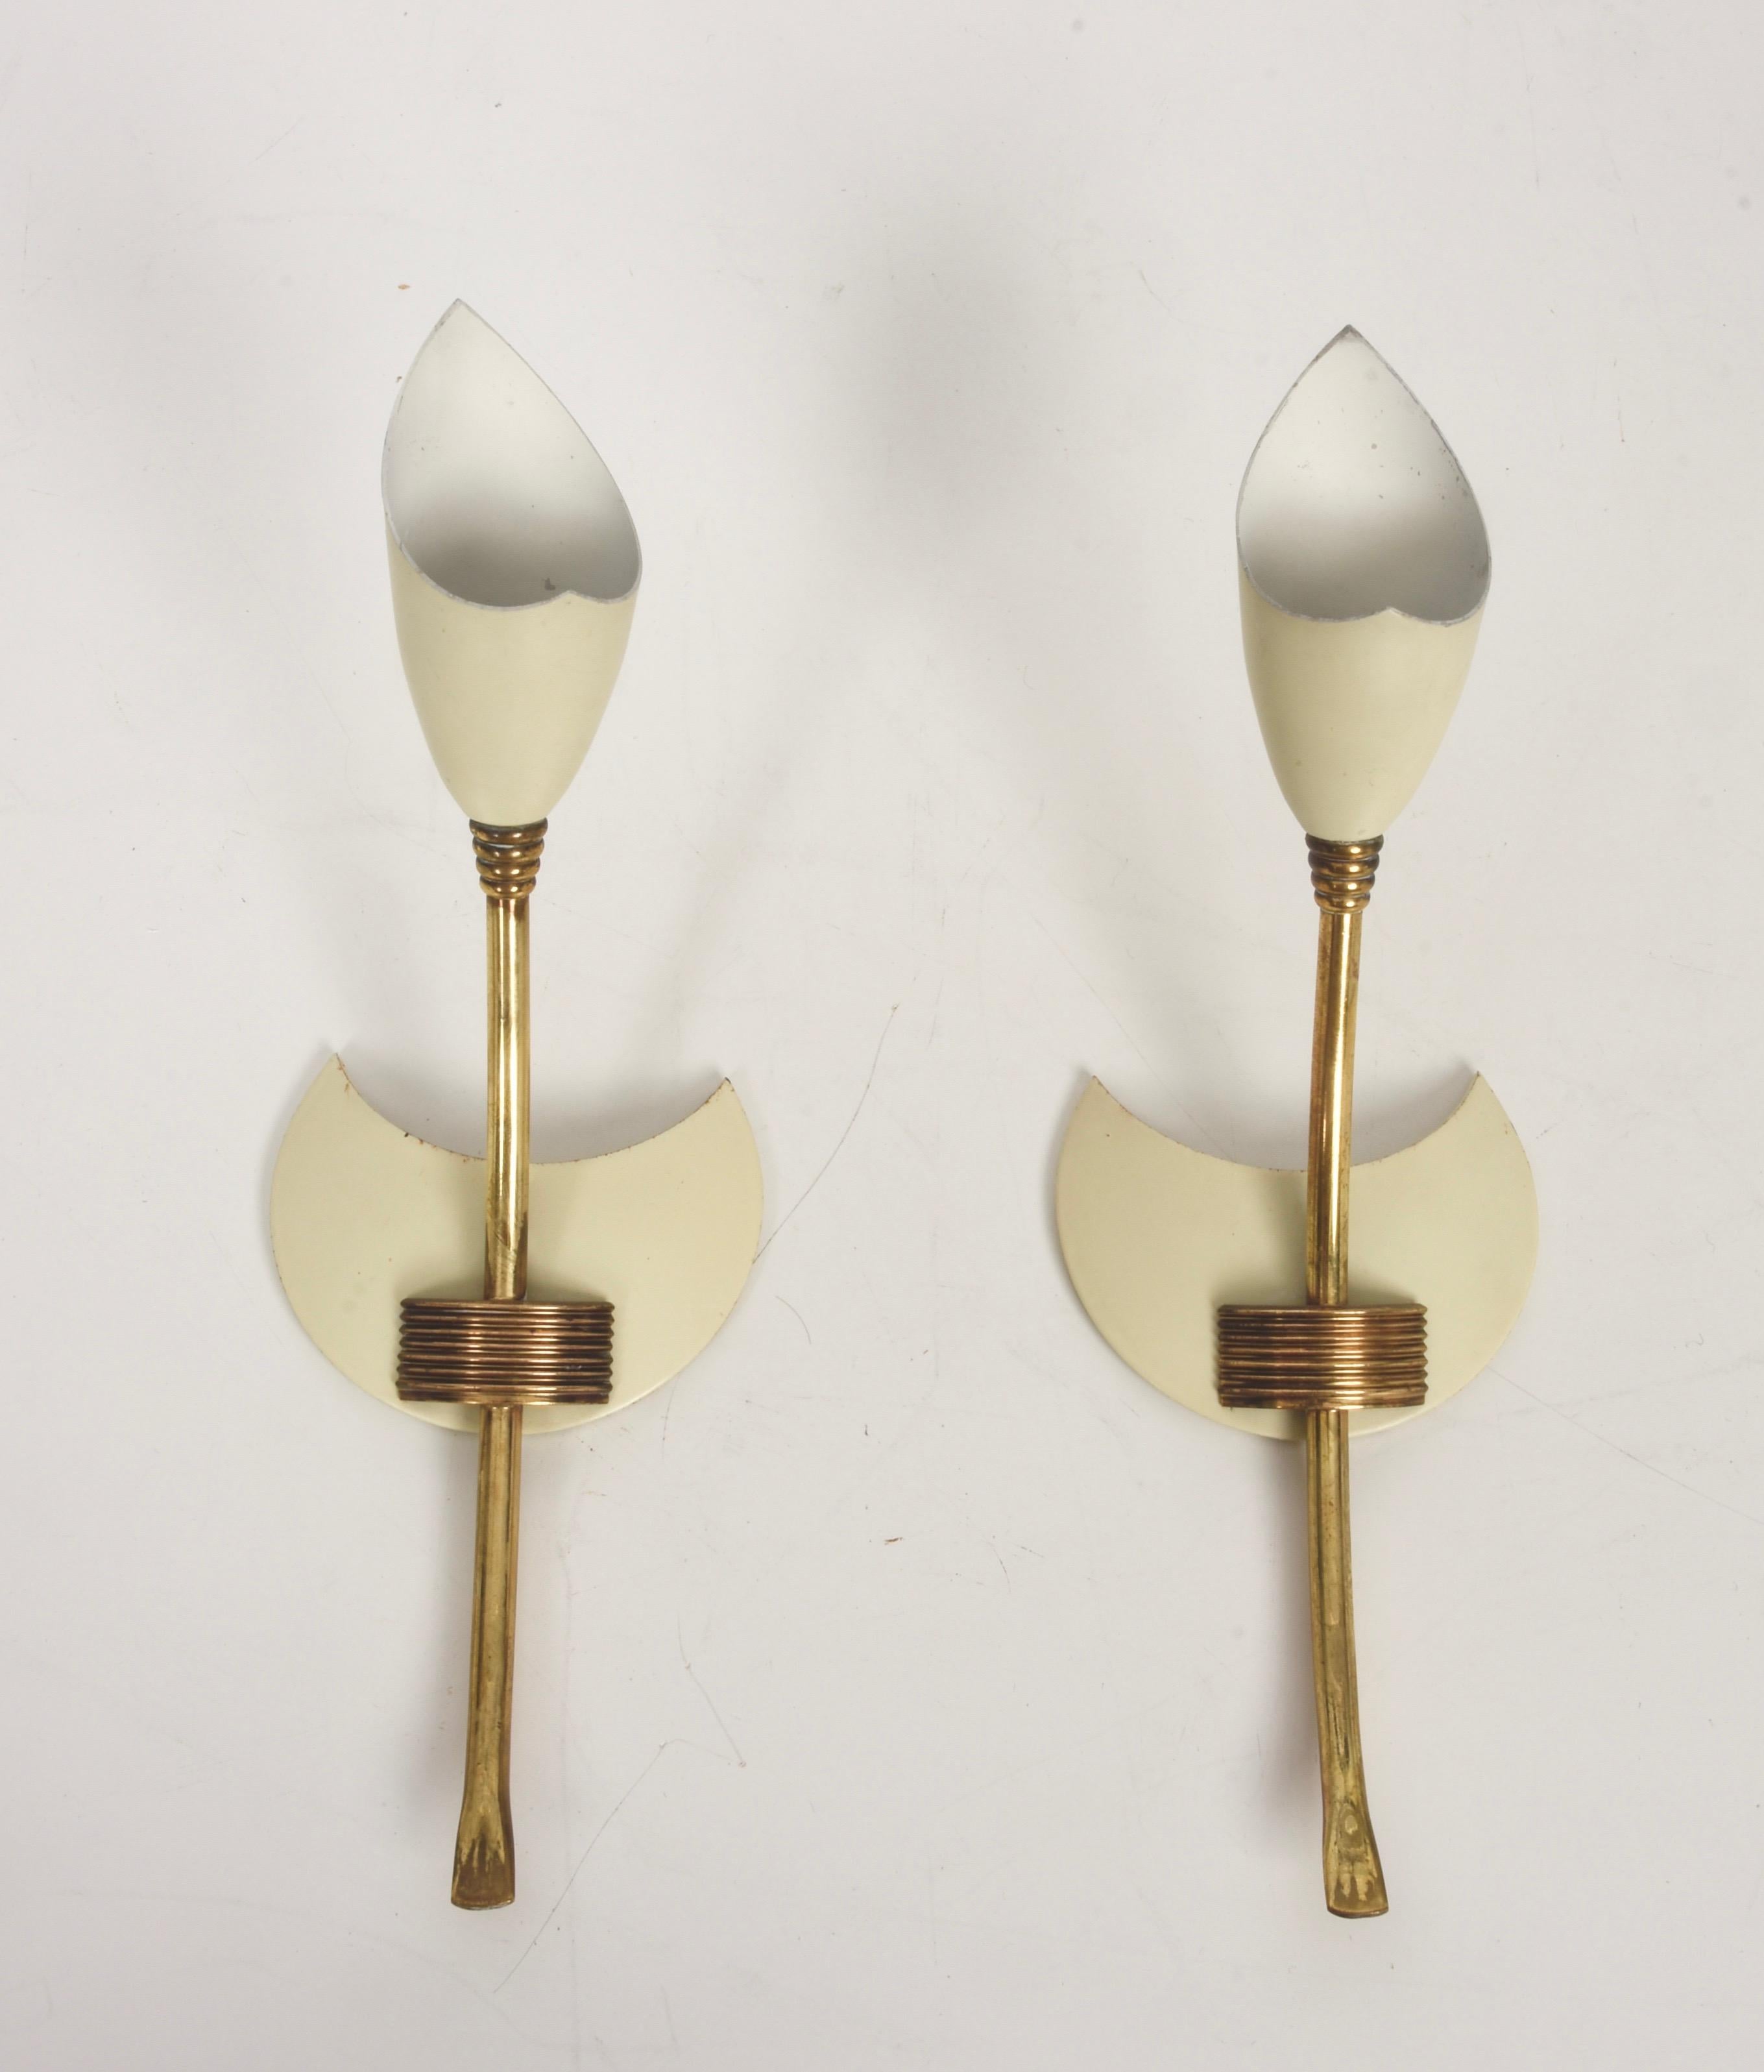 Pair of GCME Midcentury Brass and Enamelled Aluminum Italian Tulip Sconces 1950s For Sale 1